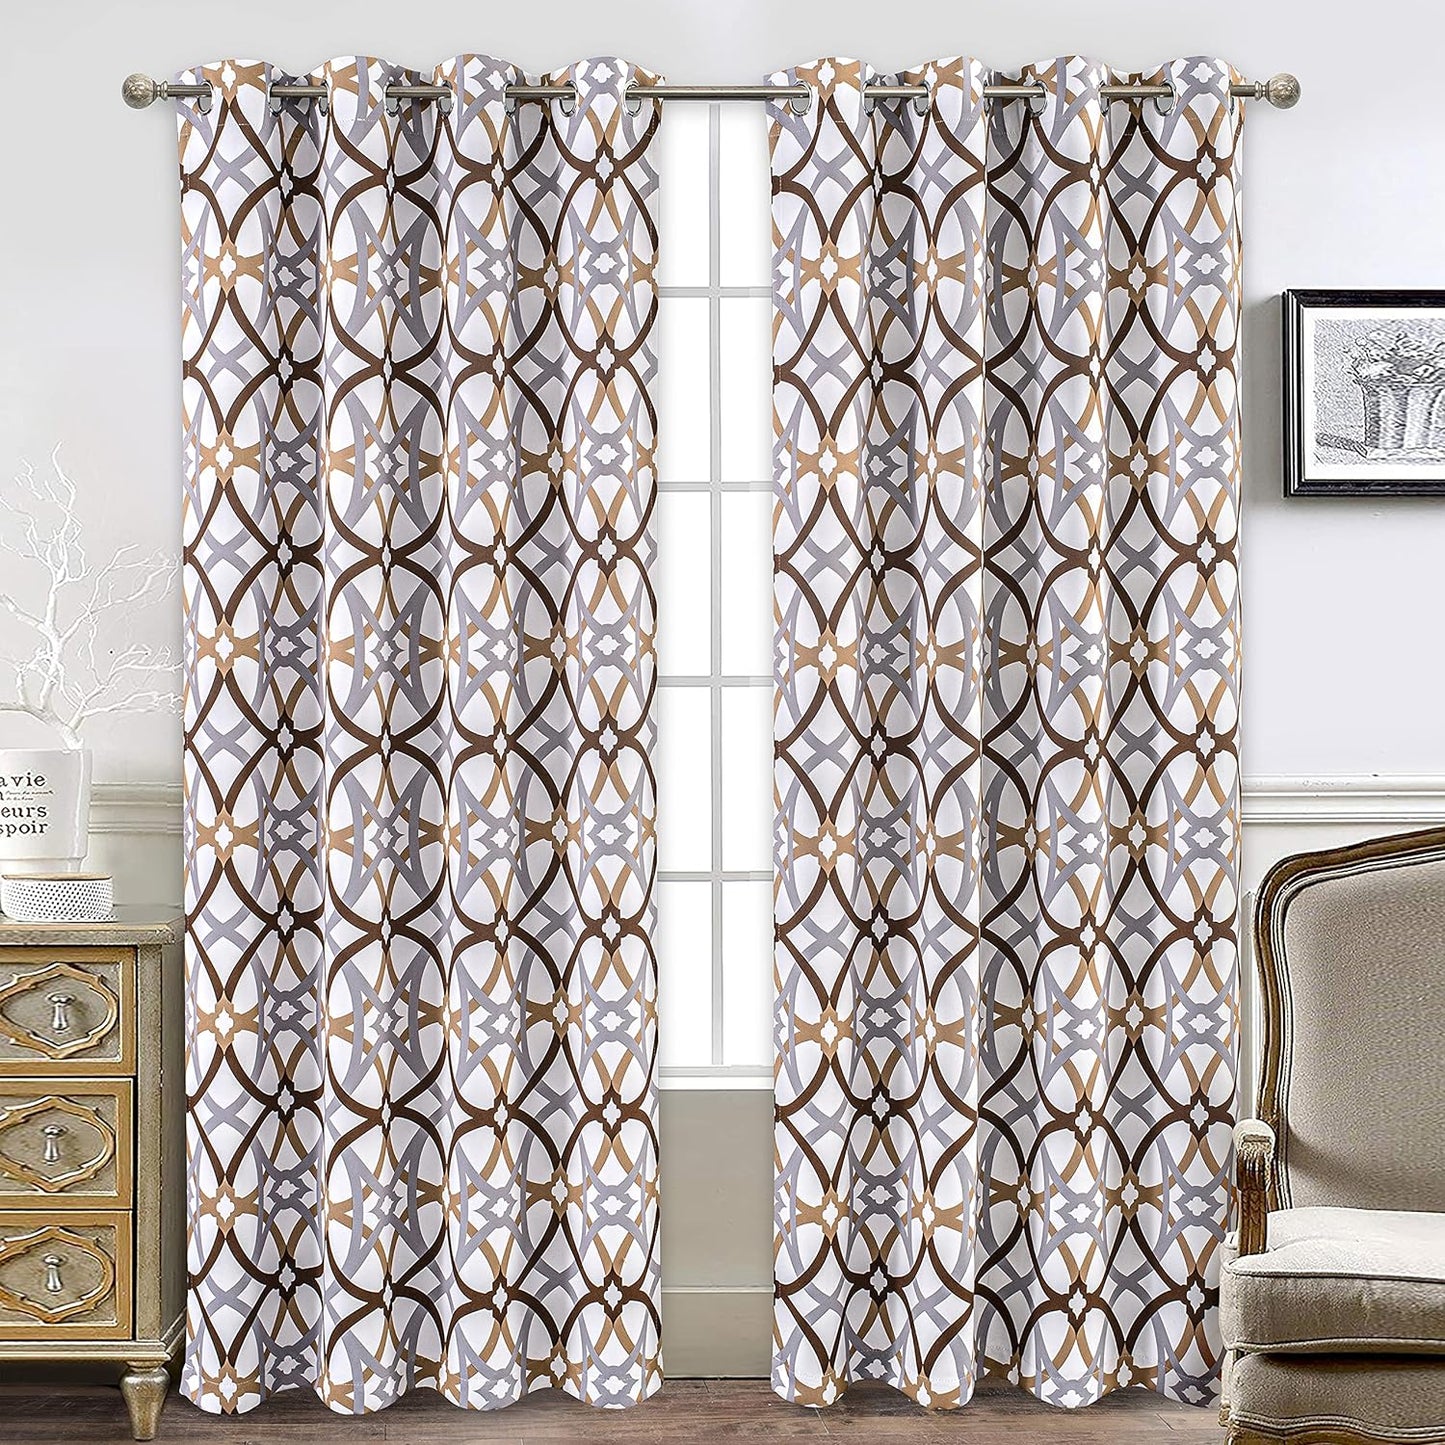 Driftaway Alexander Thermal Blackout Grommet Unlined Window Curtains Spiral Geo Trellis Pattern Set of 2 Panels Each Size 52 Inch by 84 Inch Red and Gray  DriftAway Brown 52"X84" 